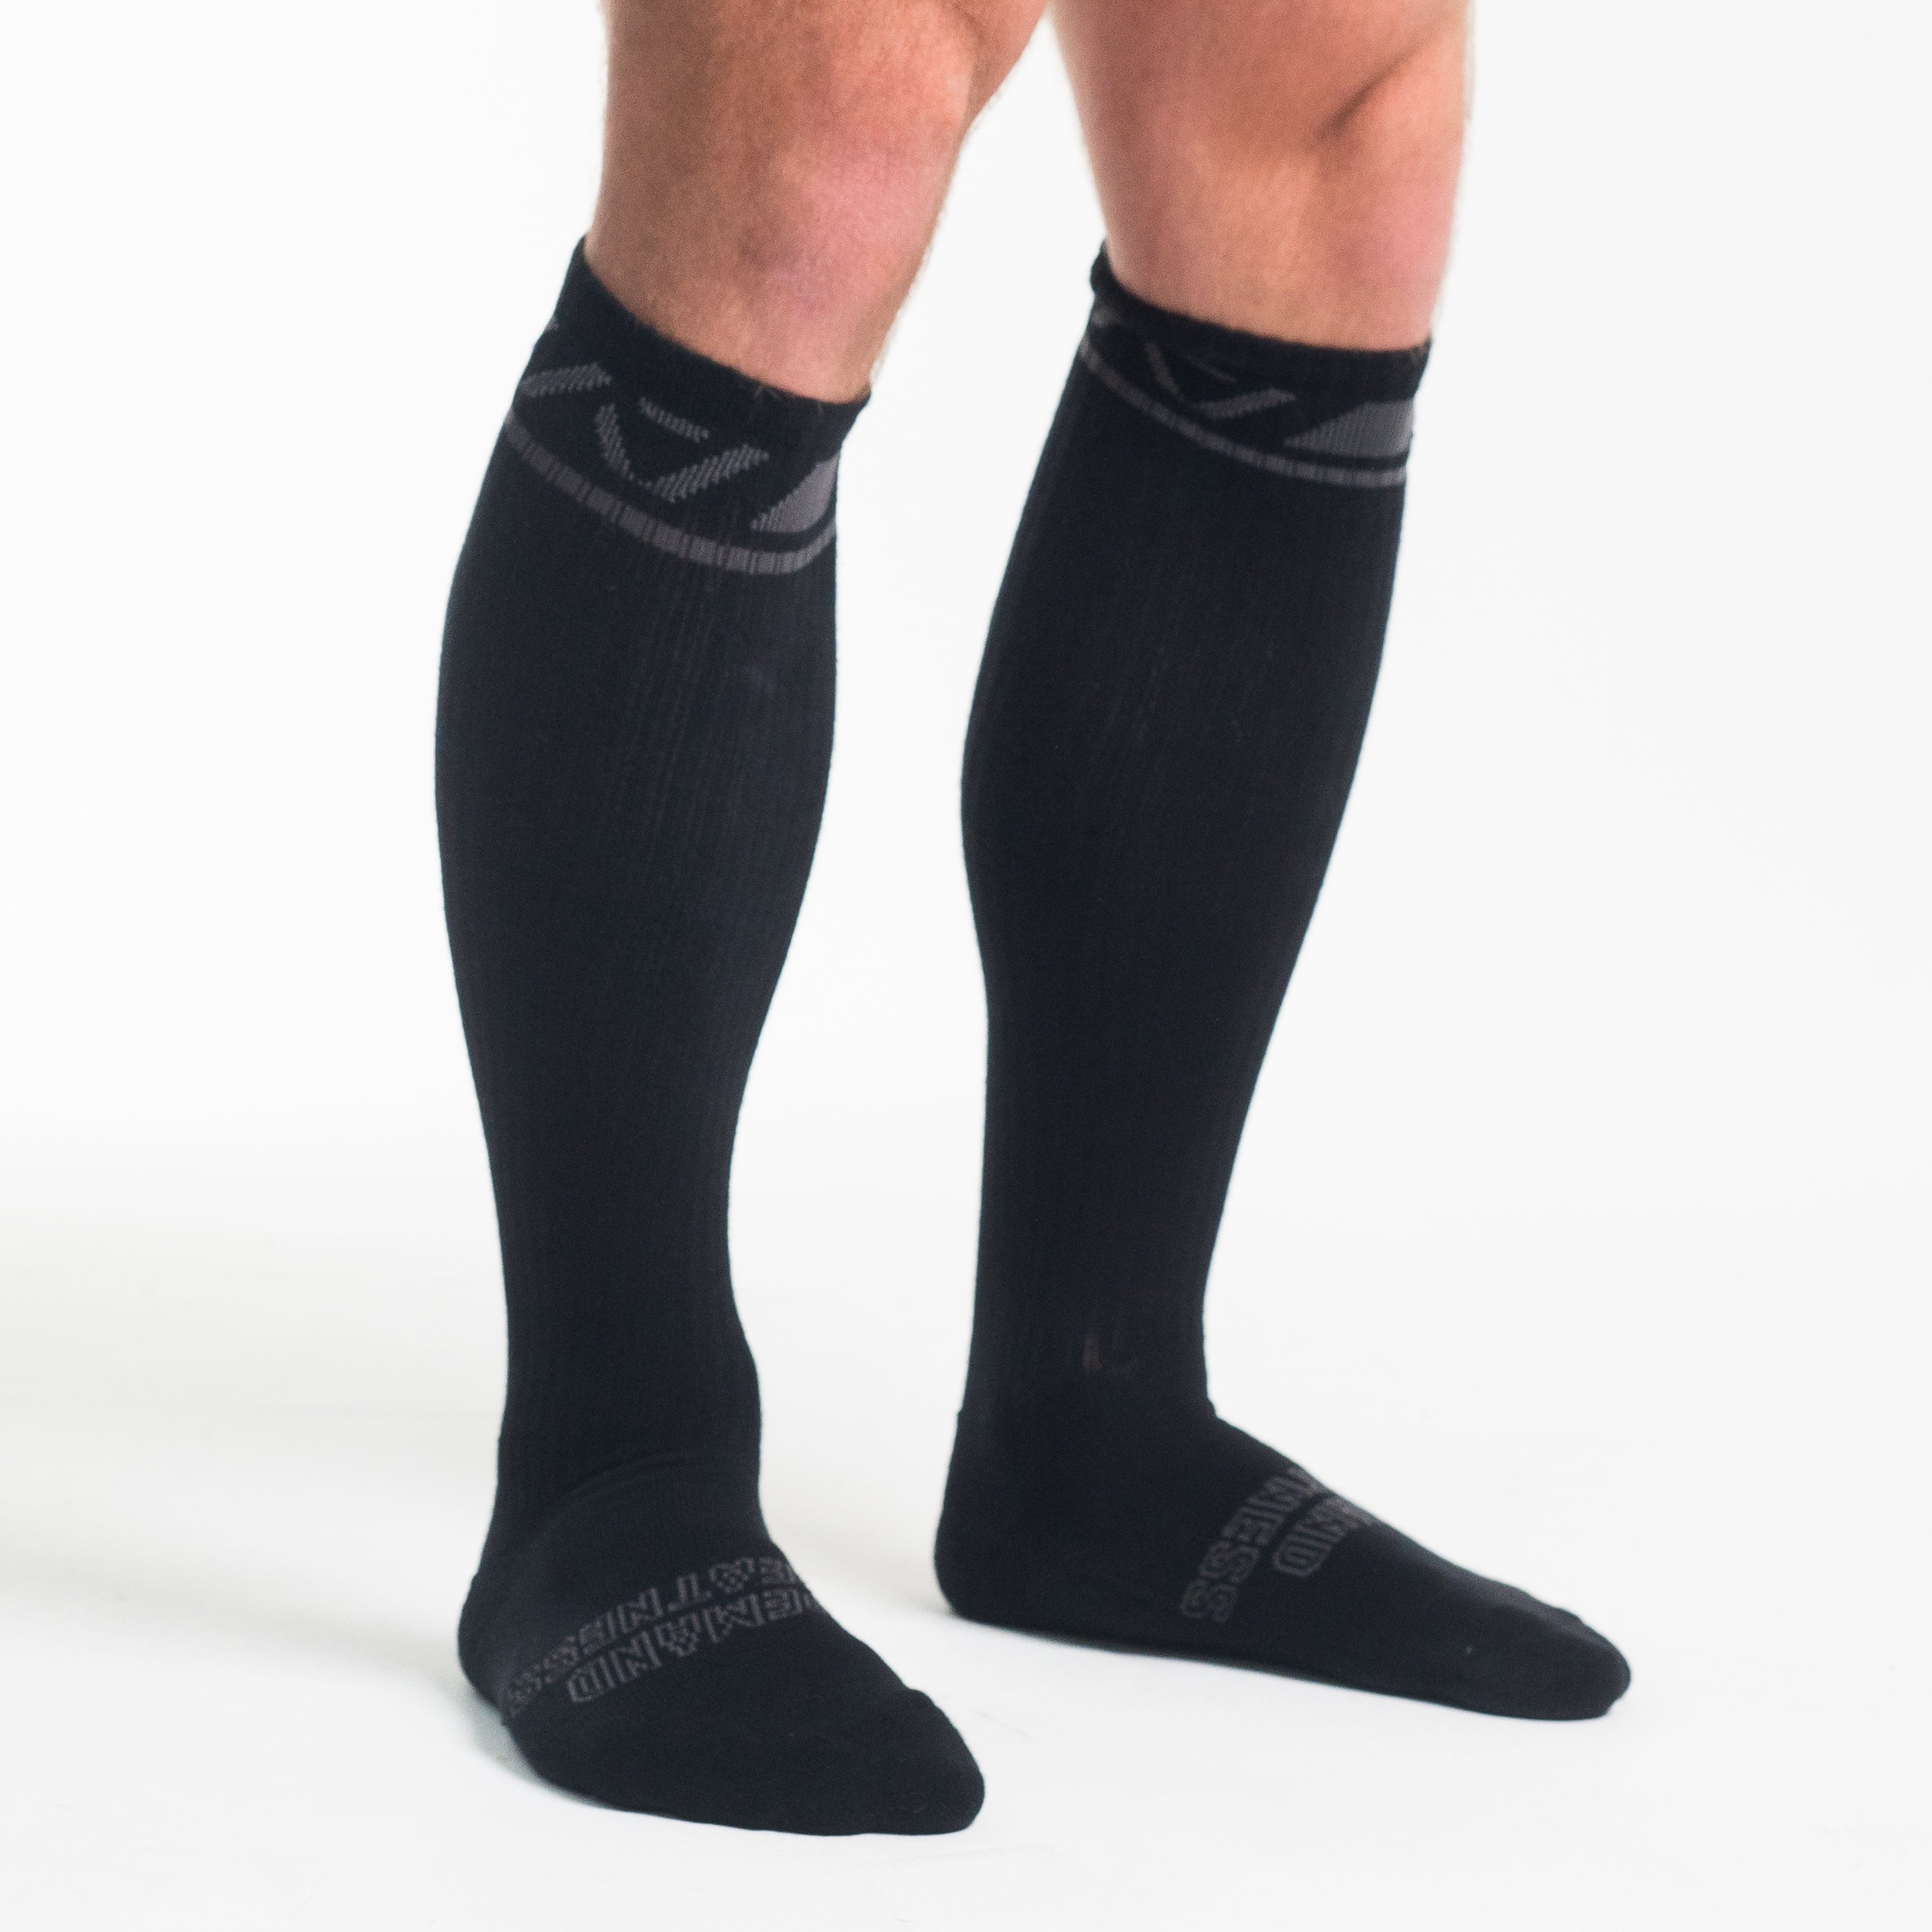 A7 Shadow Stone Deadlift socks are designed specifically for pulls and keep your shins protected from scrapes. A7 deadlift socks are a perfect pair to wear in training or powerlifting competition. The IPF Approved Kit includes Powerlifting Singlet, A7 Meet Shirt, A7 Zebra Wrist Wraps, A7 Deadlift Socks, Hourglass Knee Sleeves (Stiff Knee Sleeves and Rigor Mortis Knee Sleeves). All A7 Powerlifting Equipment shipping to UK, Norway, Switzerland and Iceland.